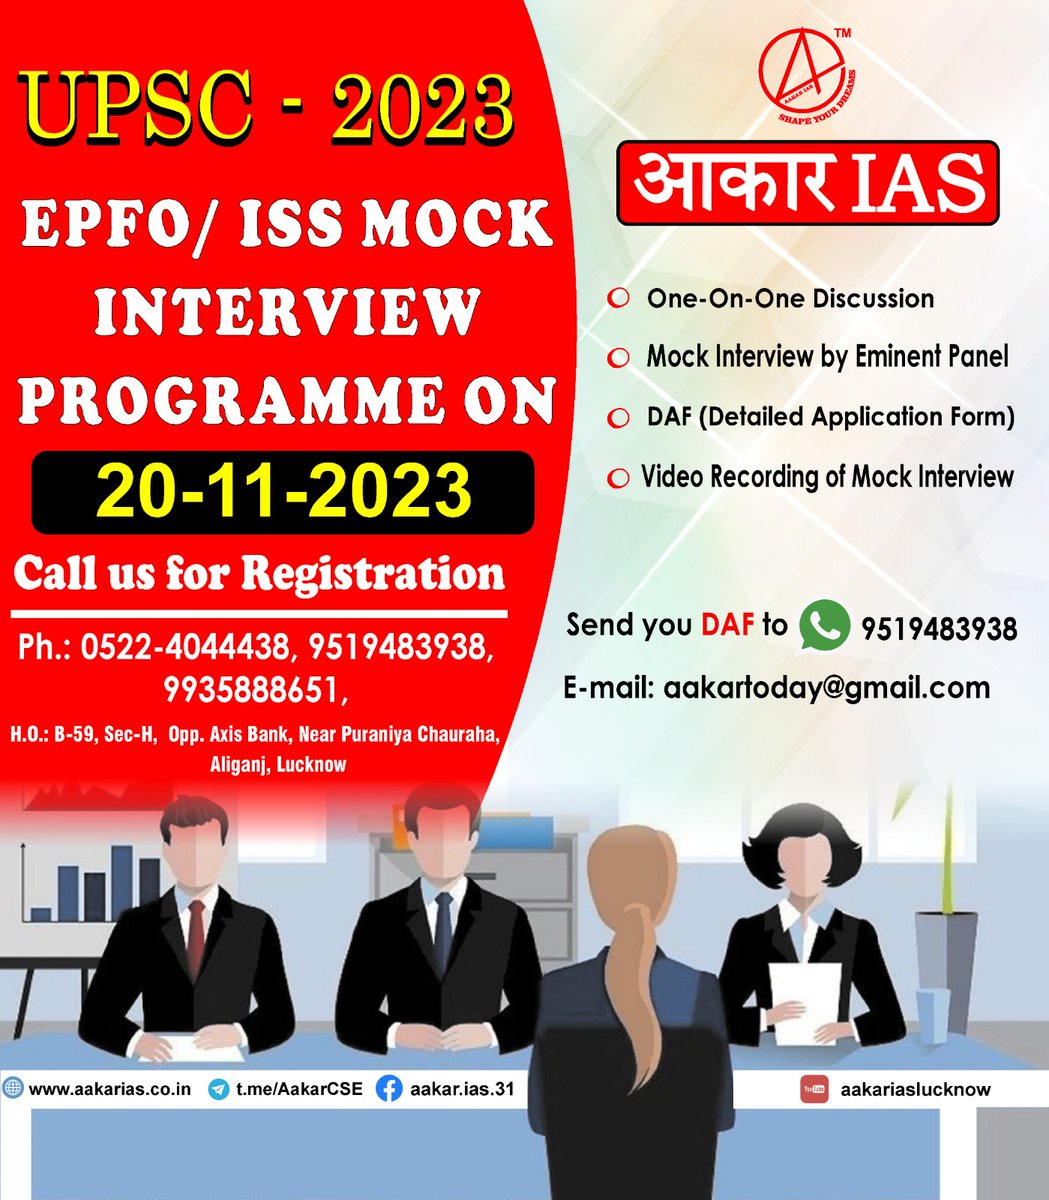 This interview programme will be conducted under the guidance of eminent panel members....
For registration call us on 9519483938, 9935888651
#mockinterviews #epfo #ISS #interviews #fbpost #facebookpost #lucknow #aakariaslucknow